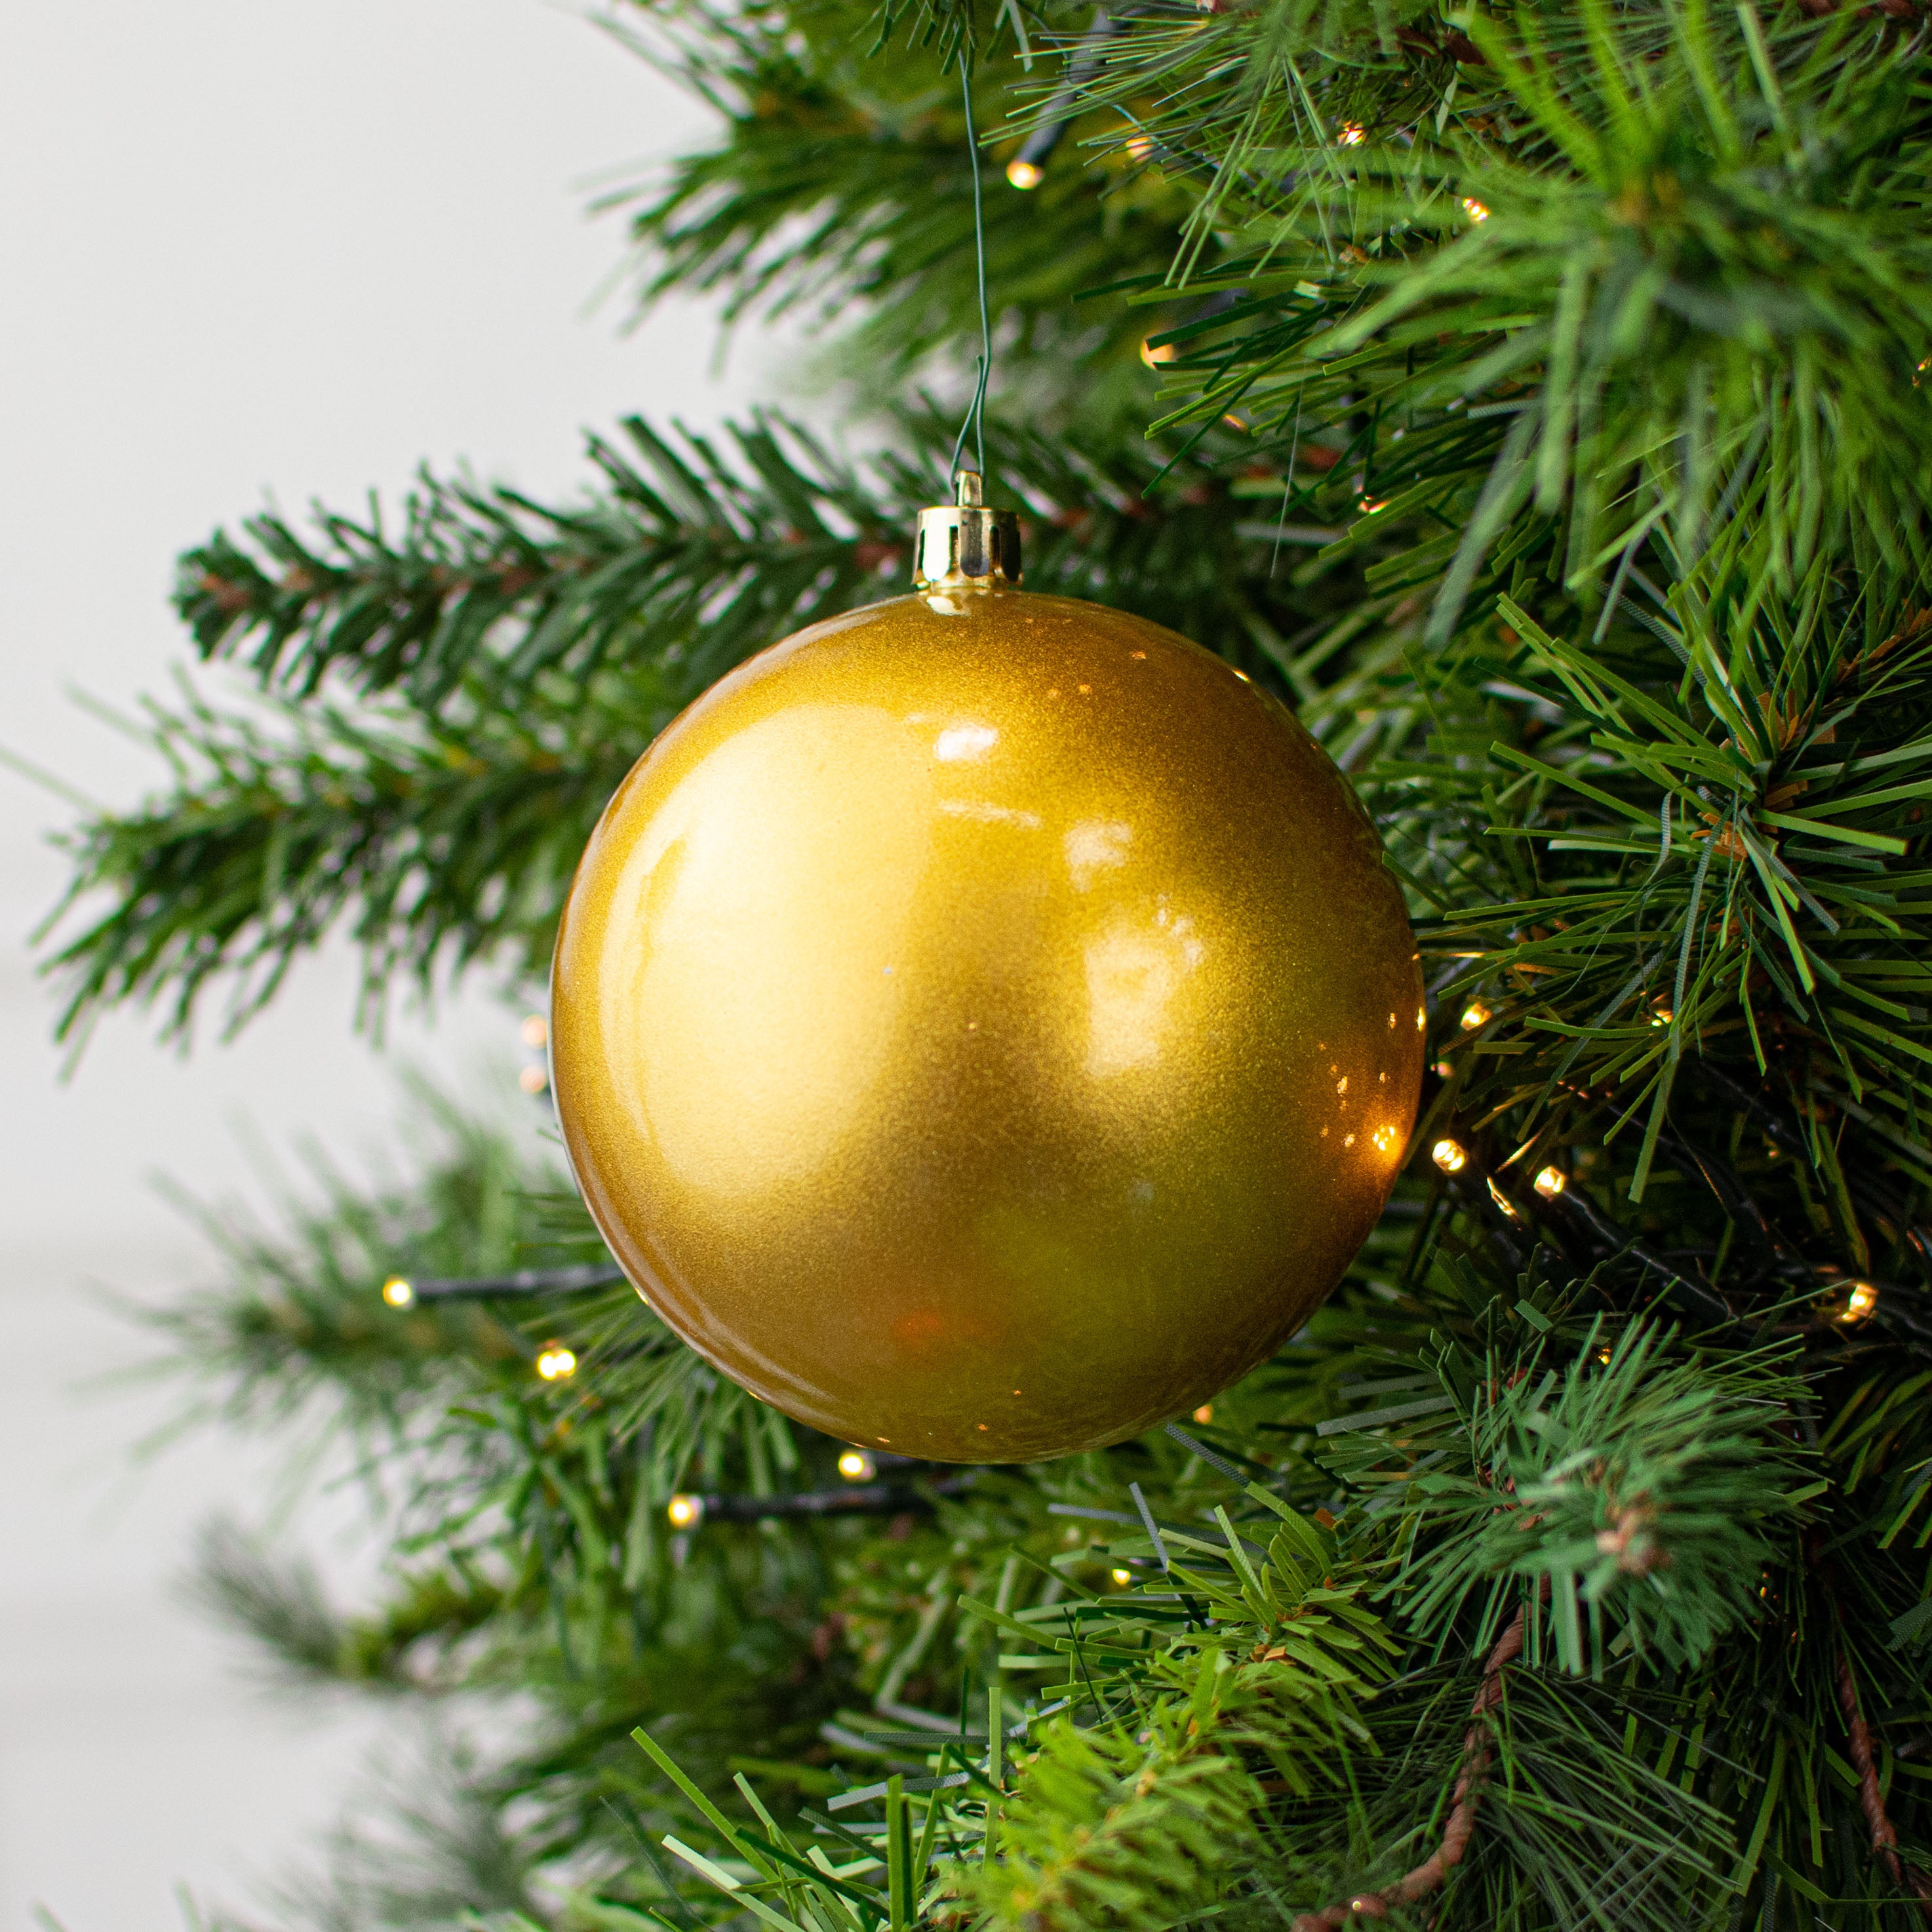 100MM Plastic Ball Ornament: Candy Apple Gold (Set of 4)